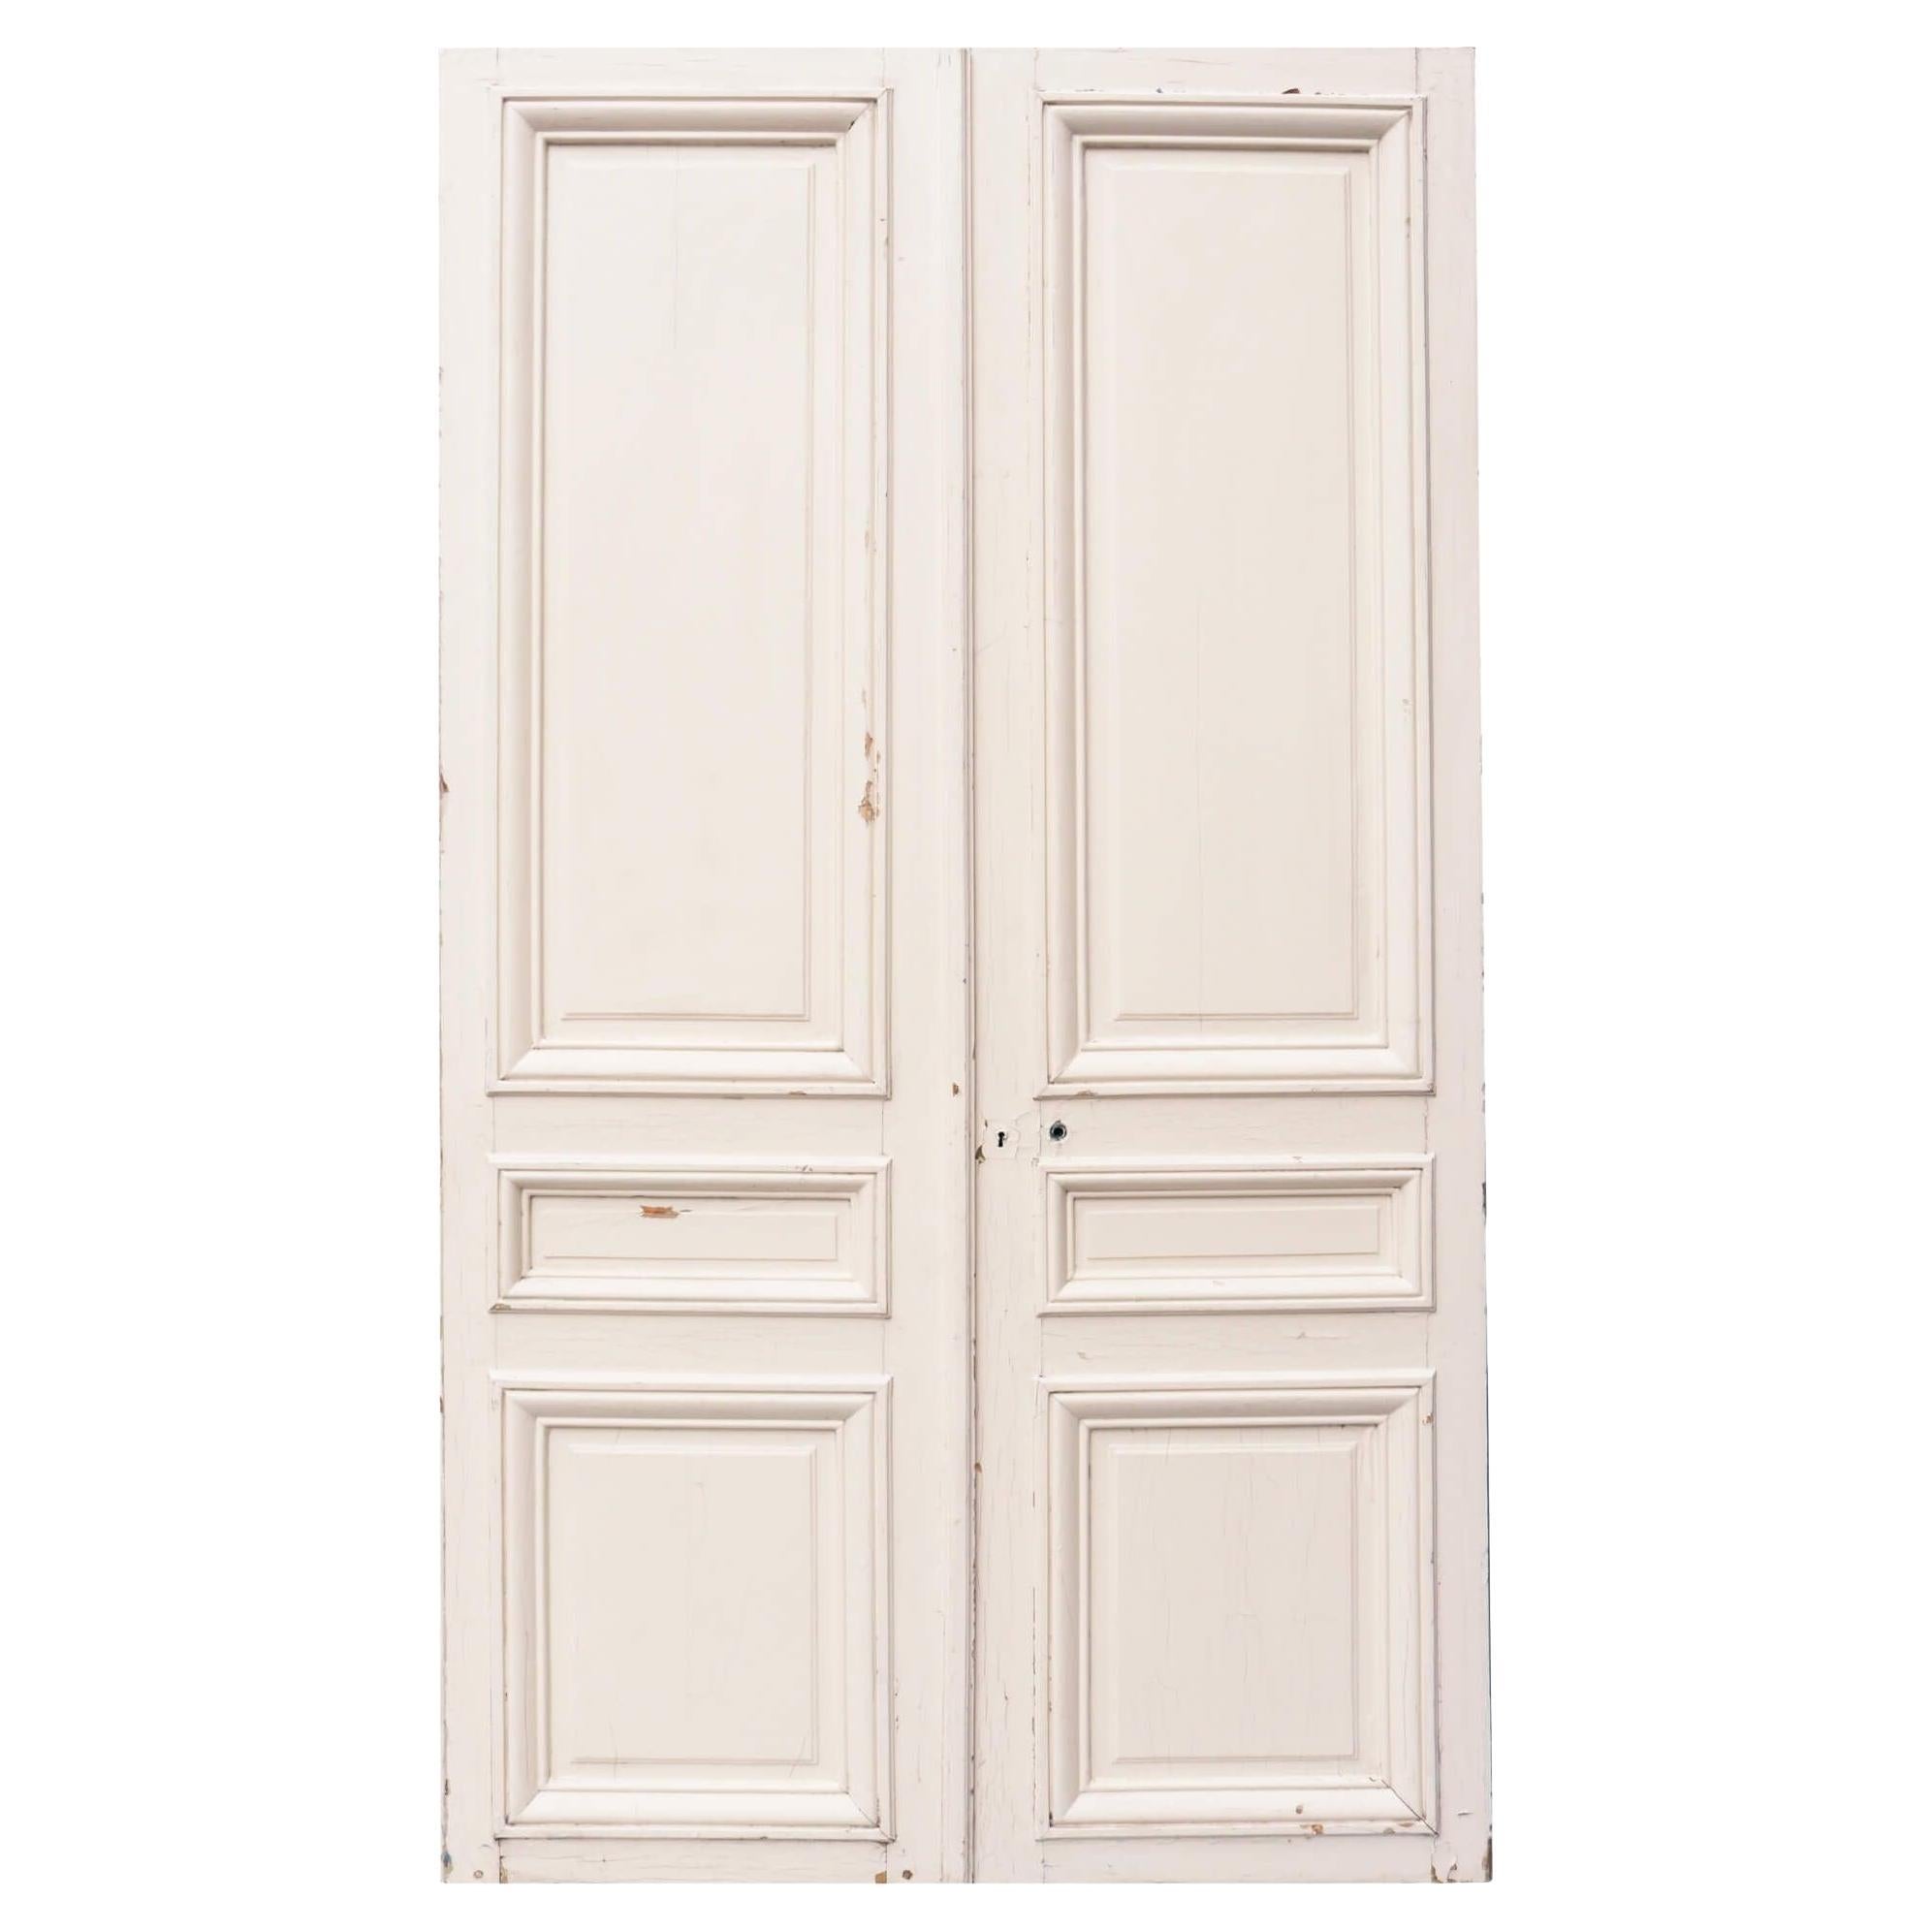 What is the best wood for interior doors?